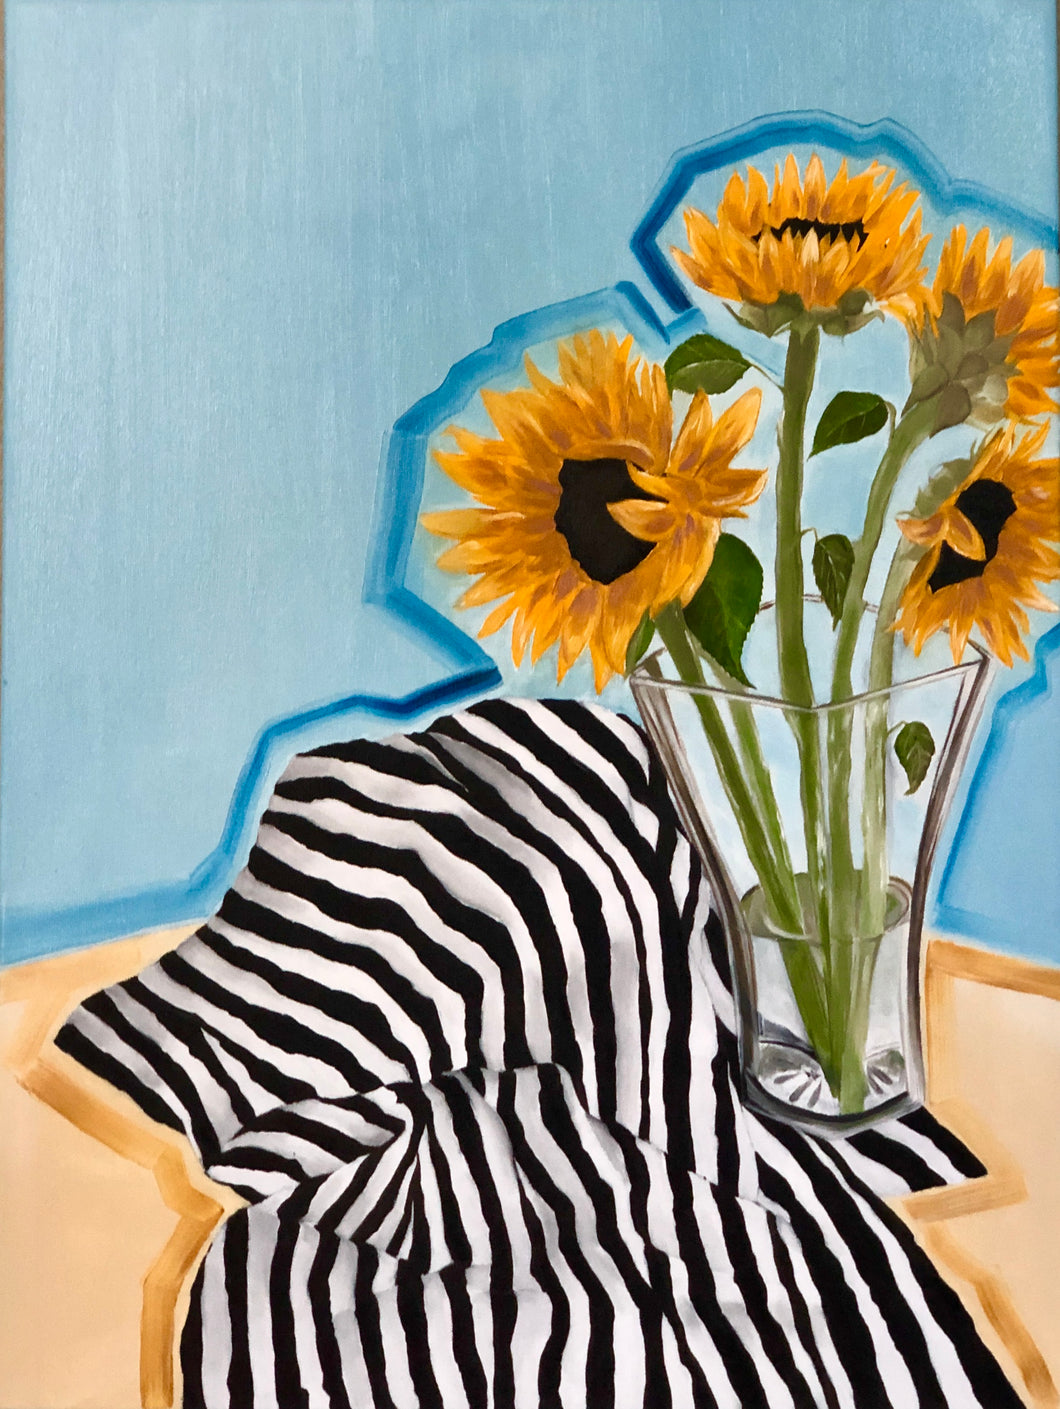 Stripes and Sunflowers